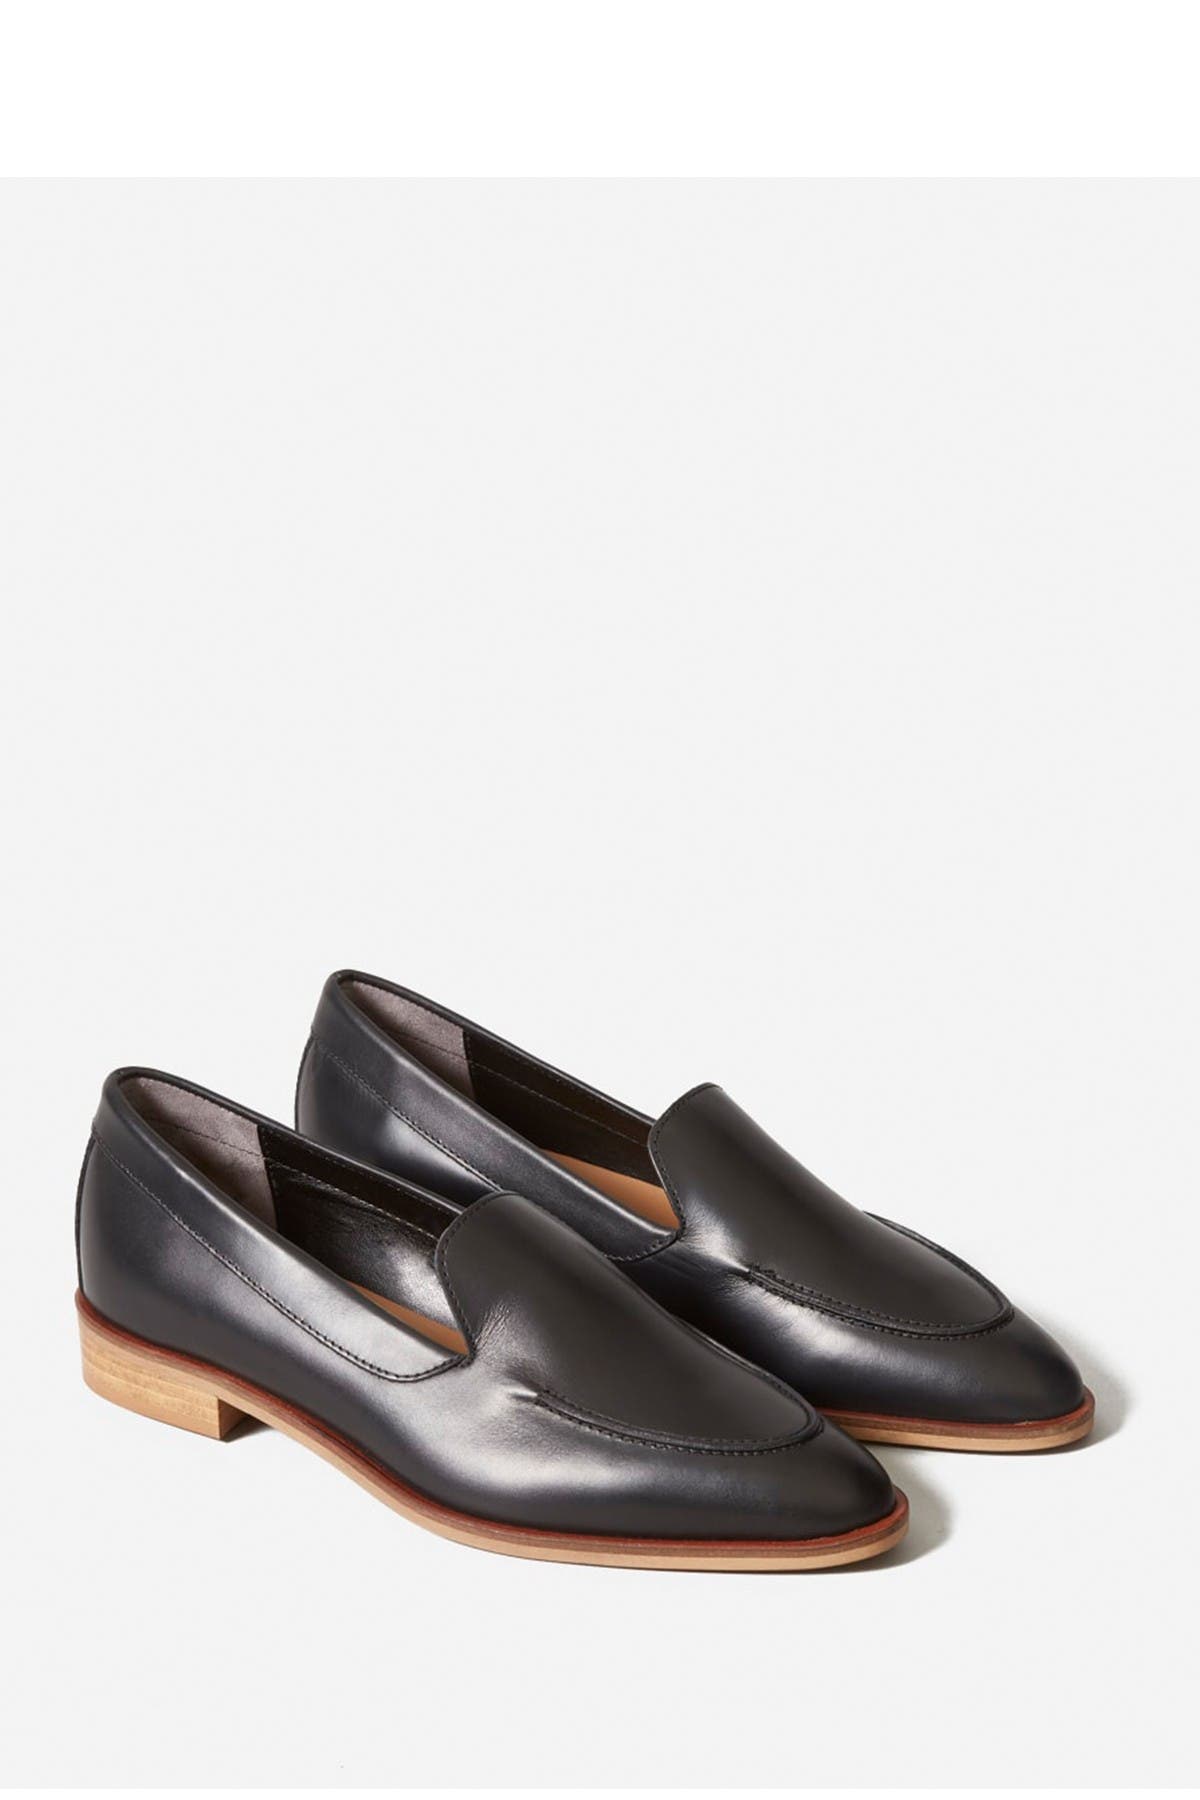 nordstrom ladies shoes flats